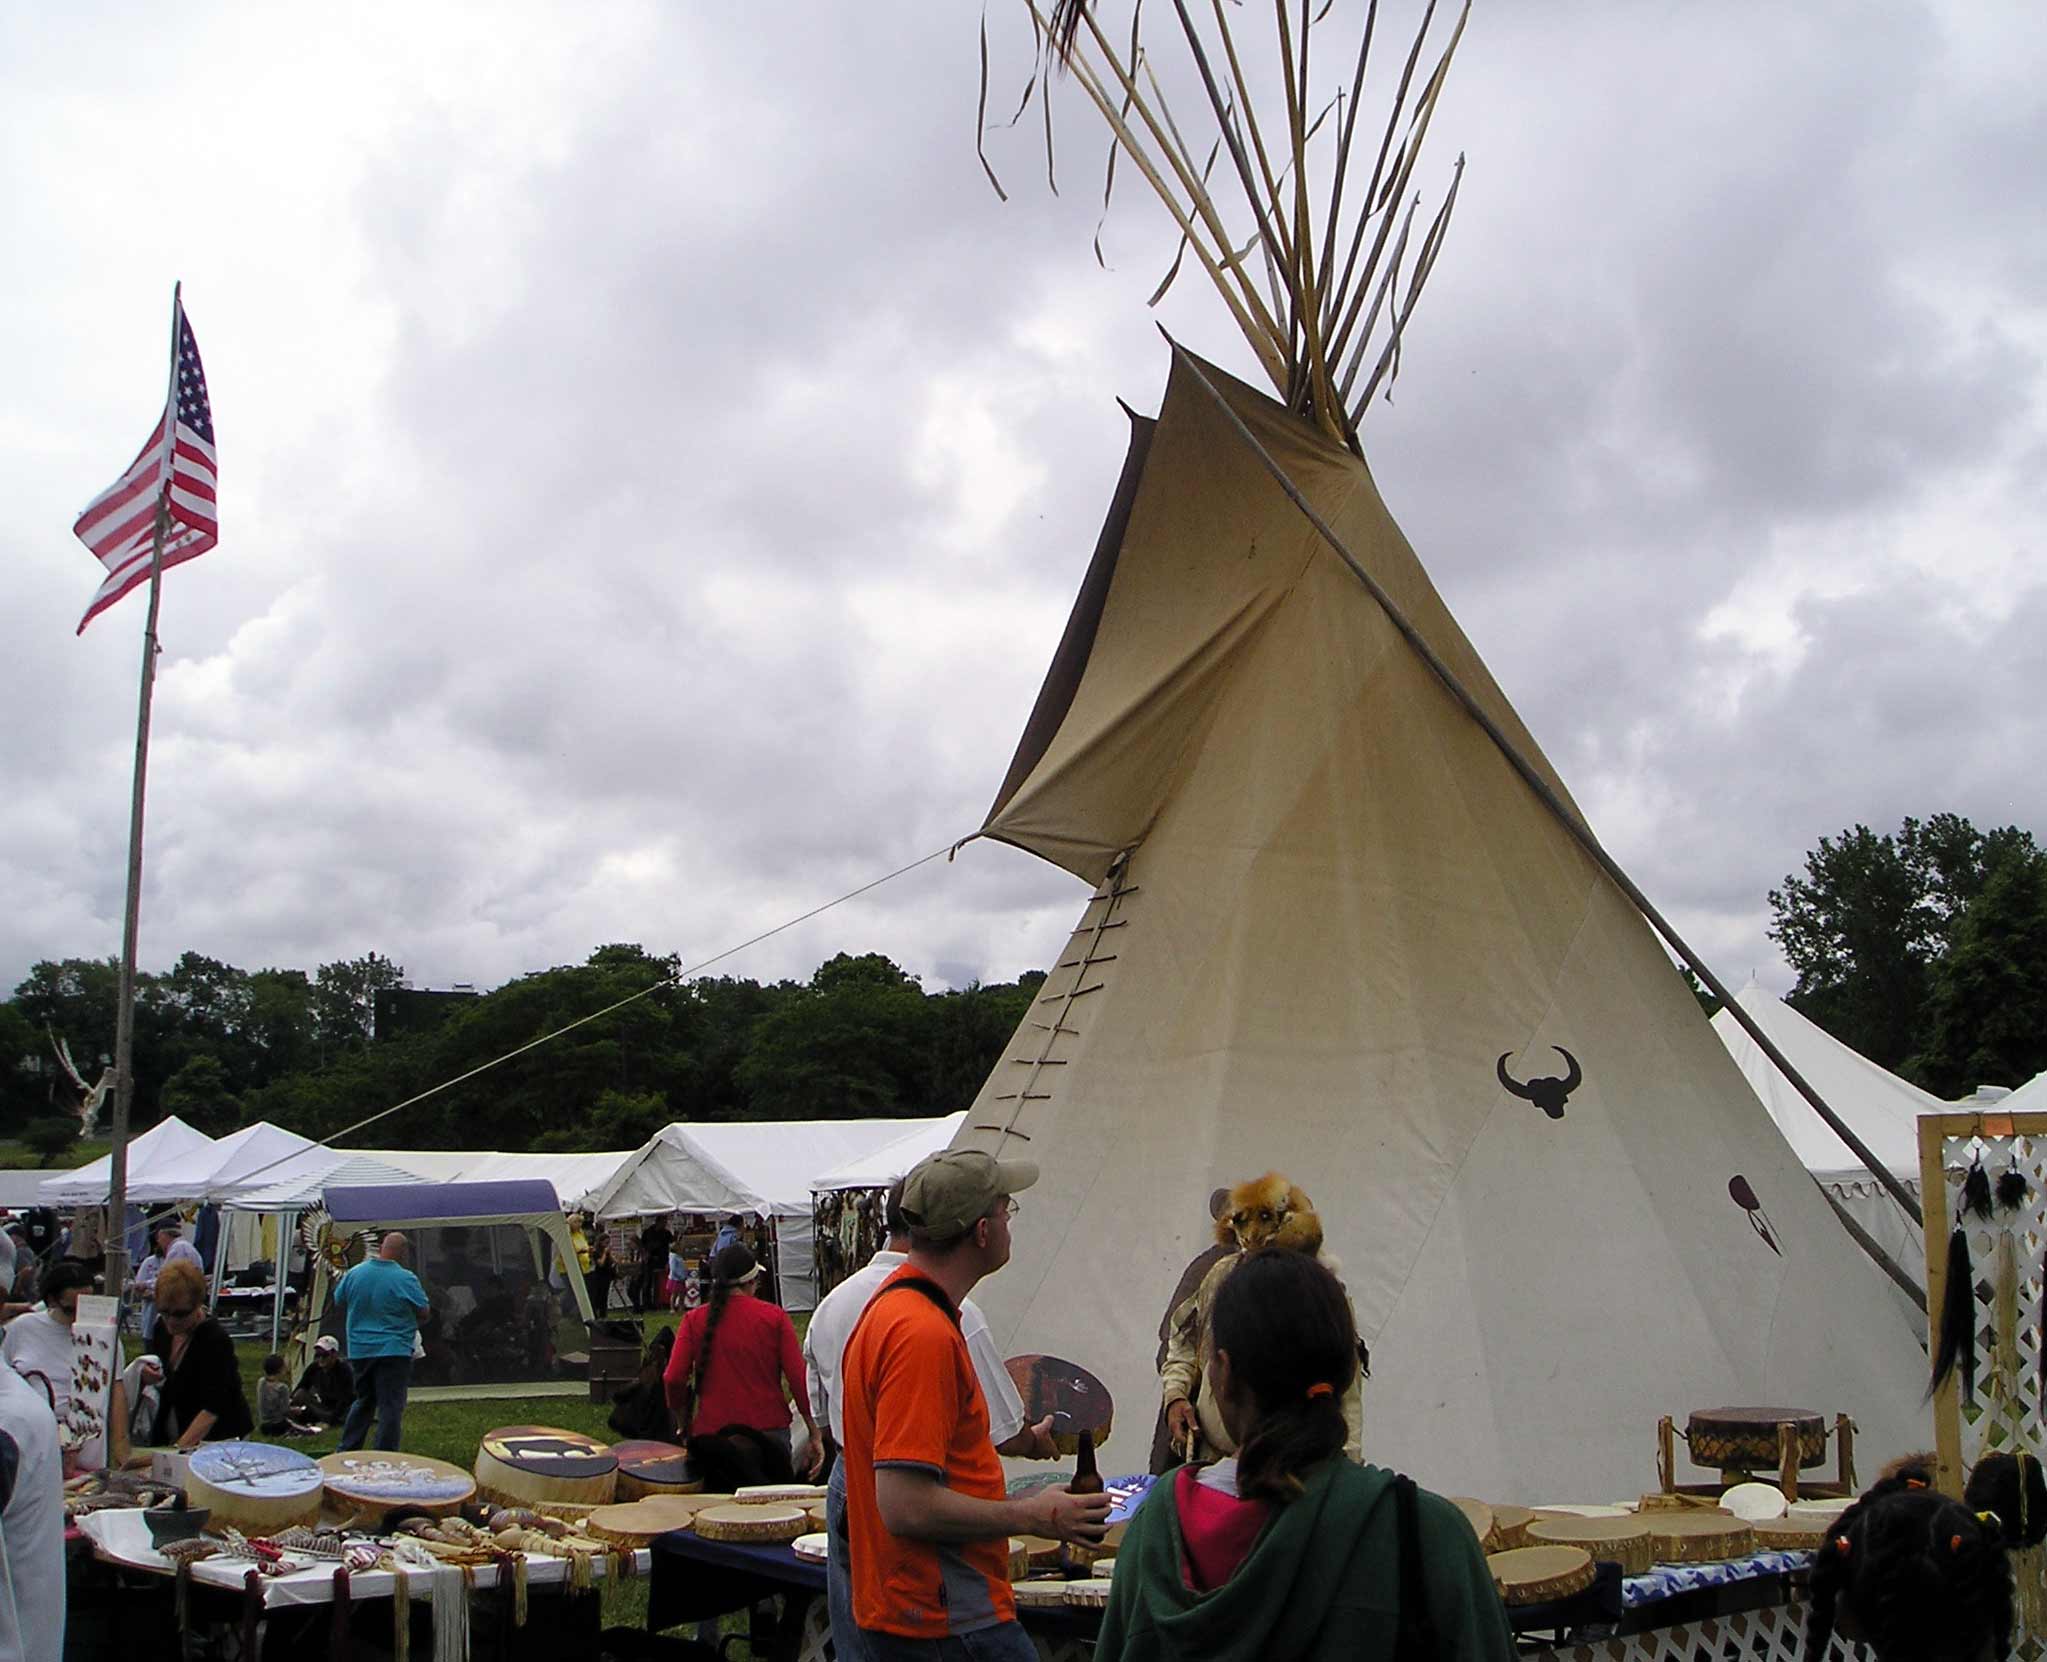 Native American costumes at the Cleveland Powwow